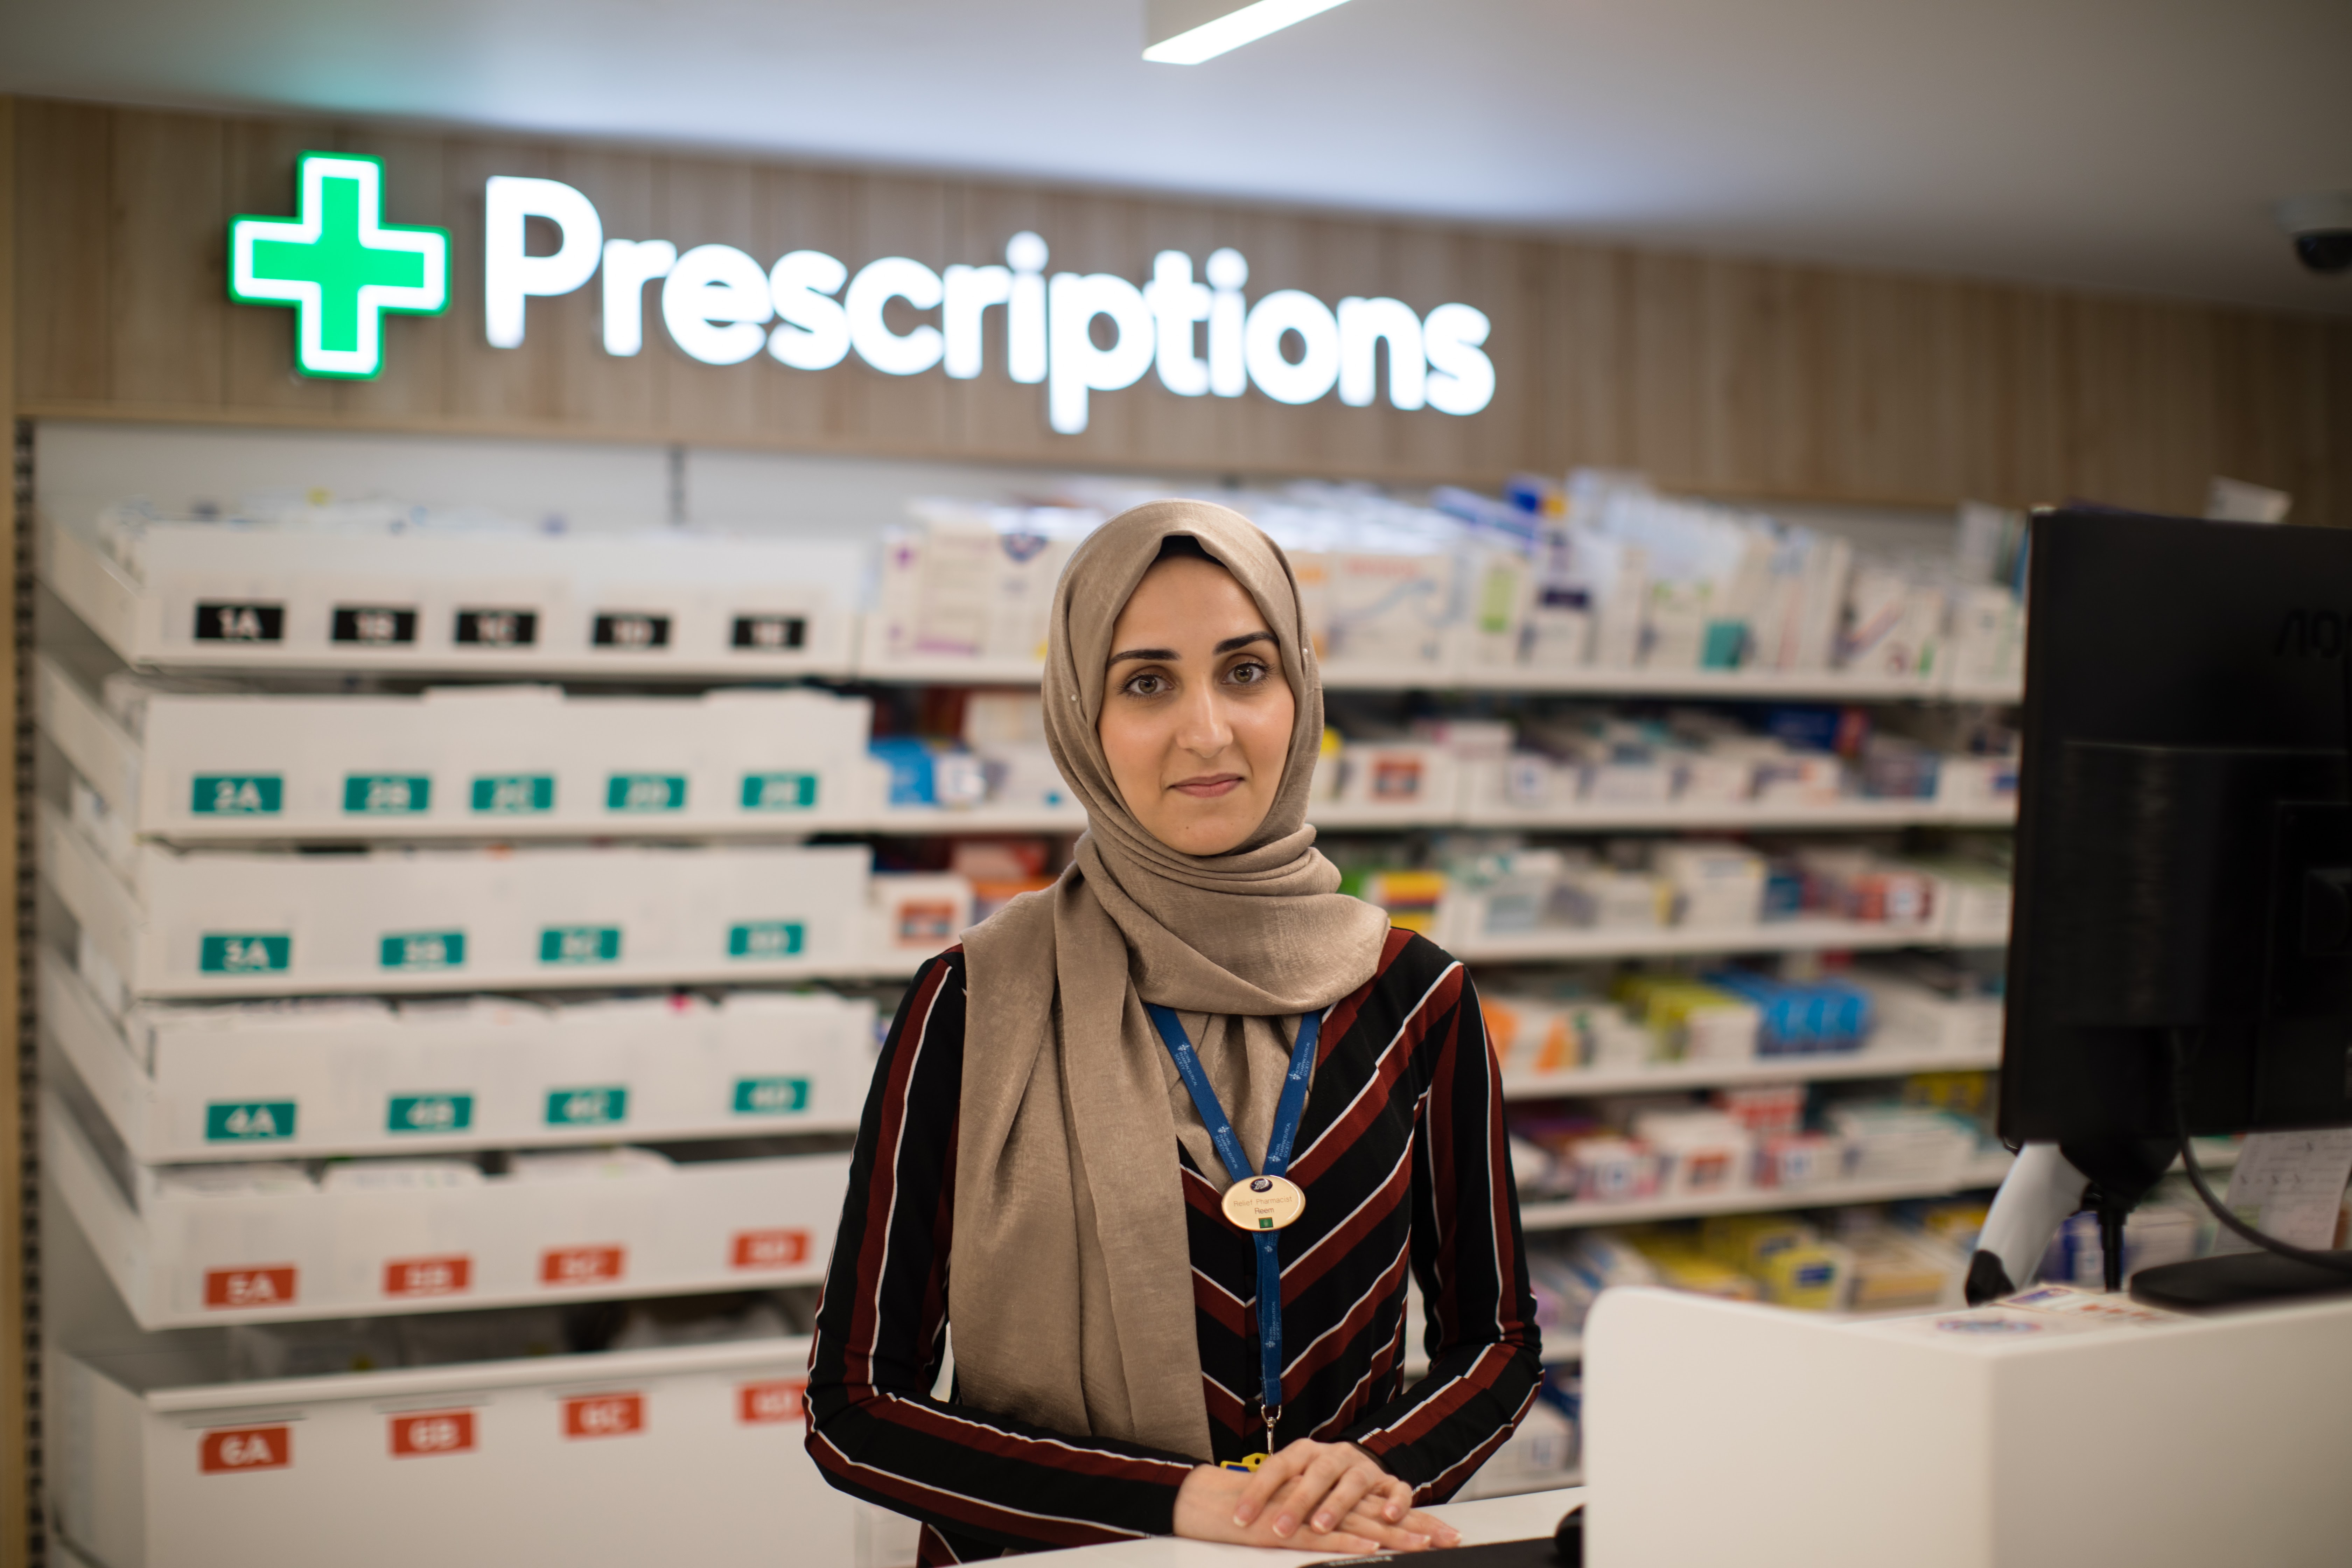 Boots can collect their medicines from Boots pharmacies or at home